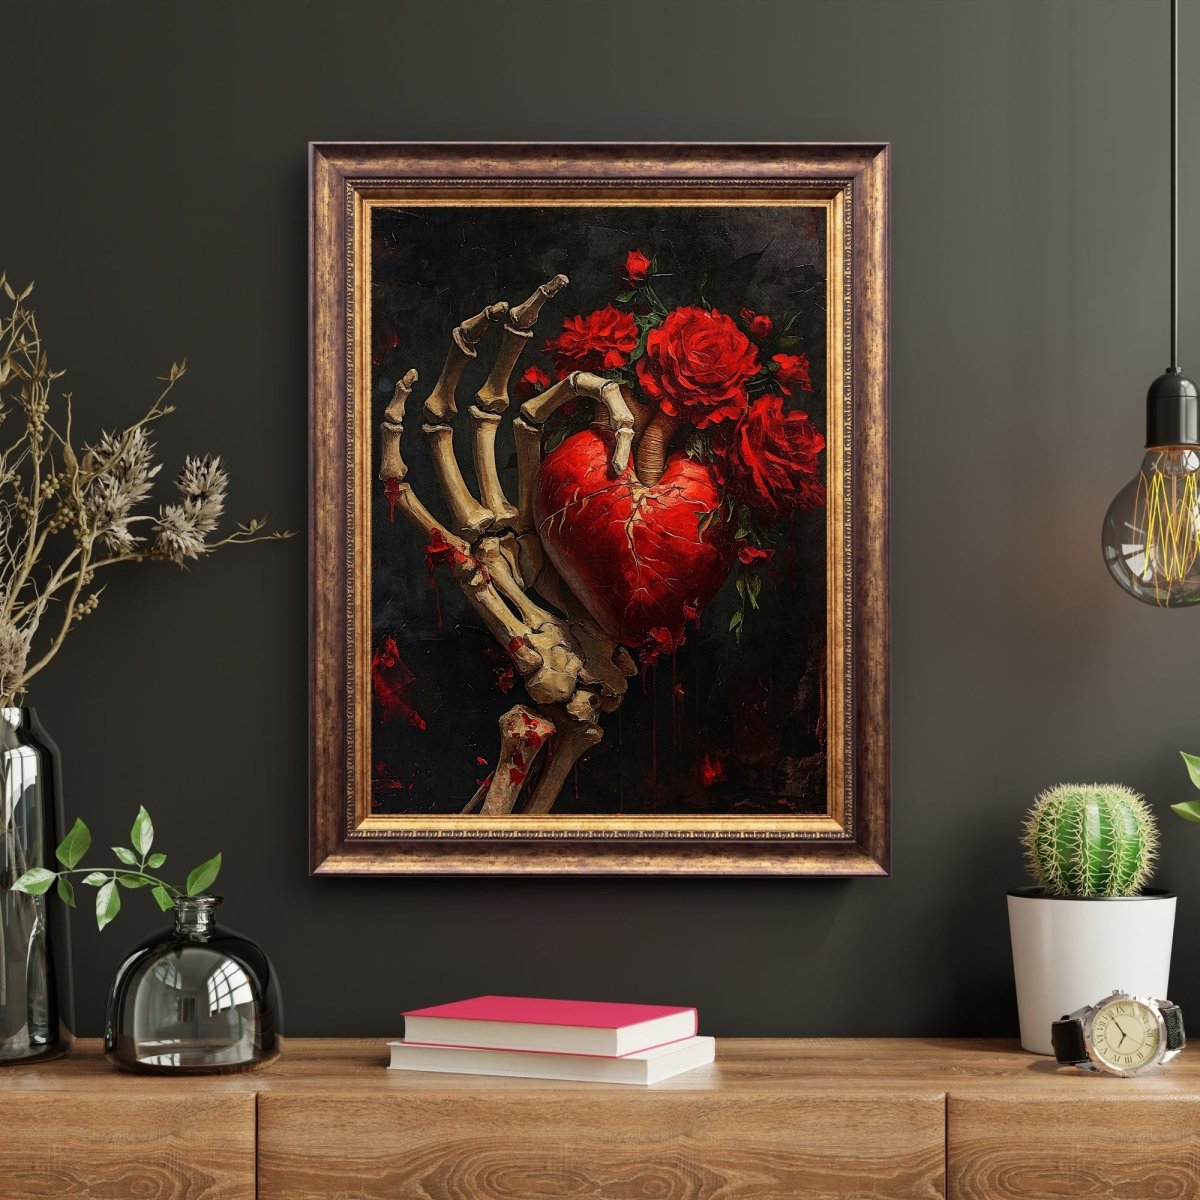 Gothic Valentine Wall Art Antique Oil Painting Skeletal Hand holding Heart and Roses Gothic Decor Goblincore Dark Romance Print Paper Poster Print - Everything Pixel